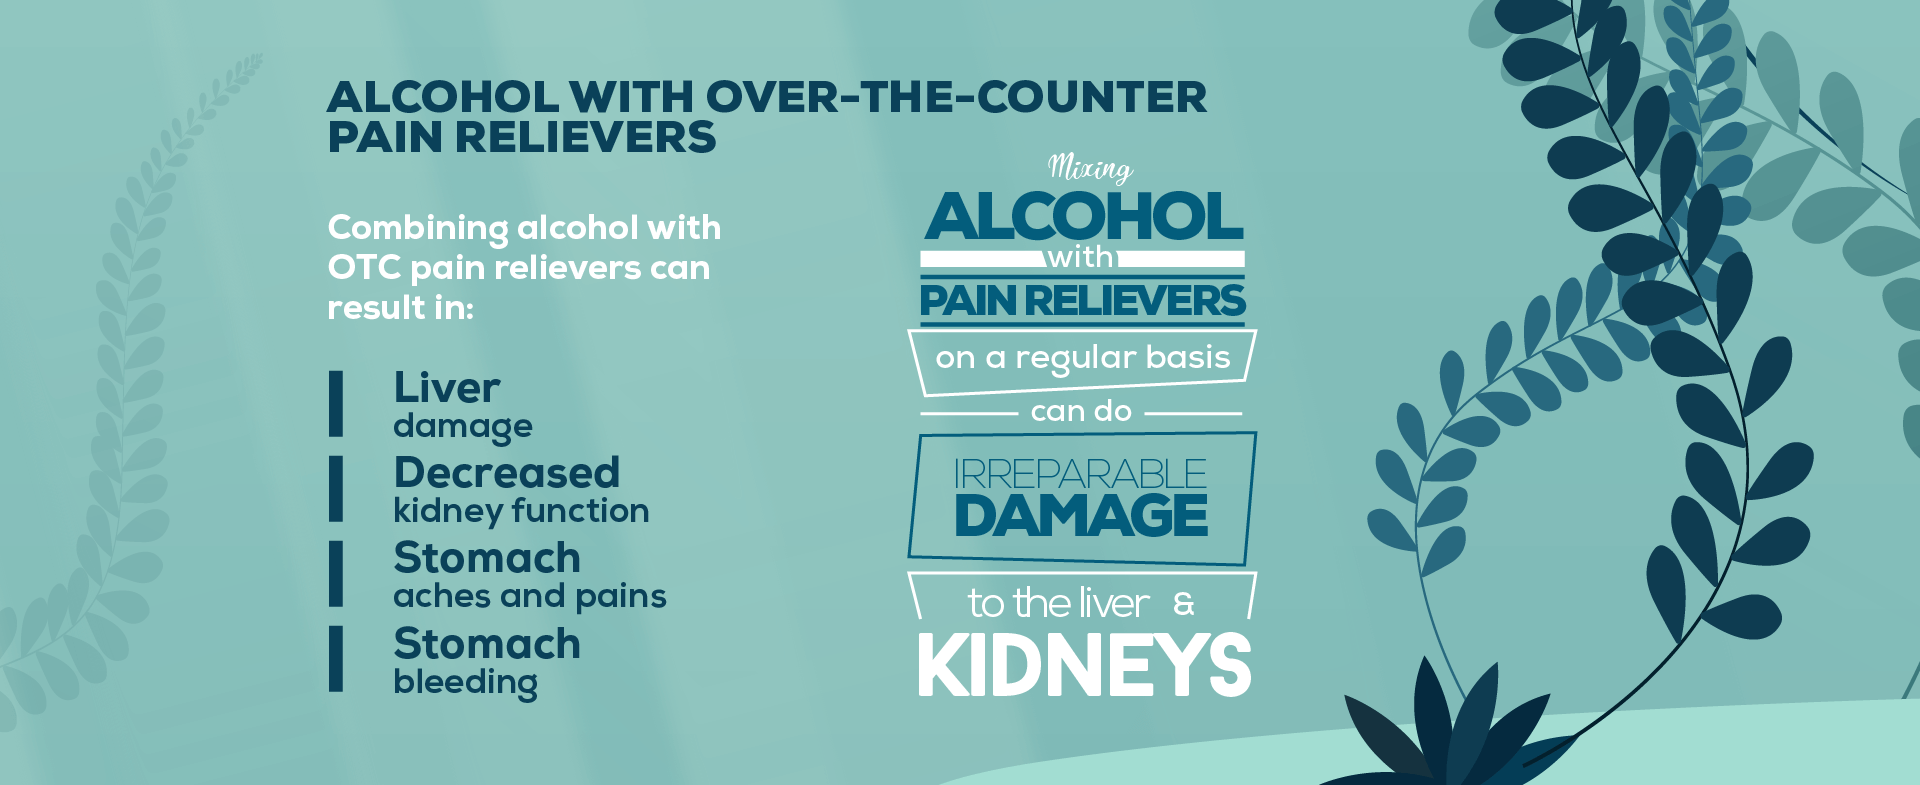 Alcohol with Over-the-Counter Pain Relievers